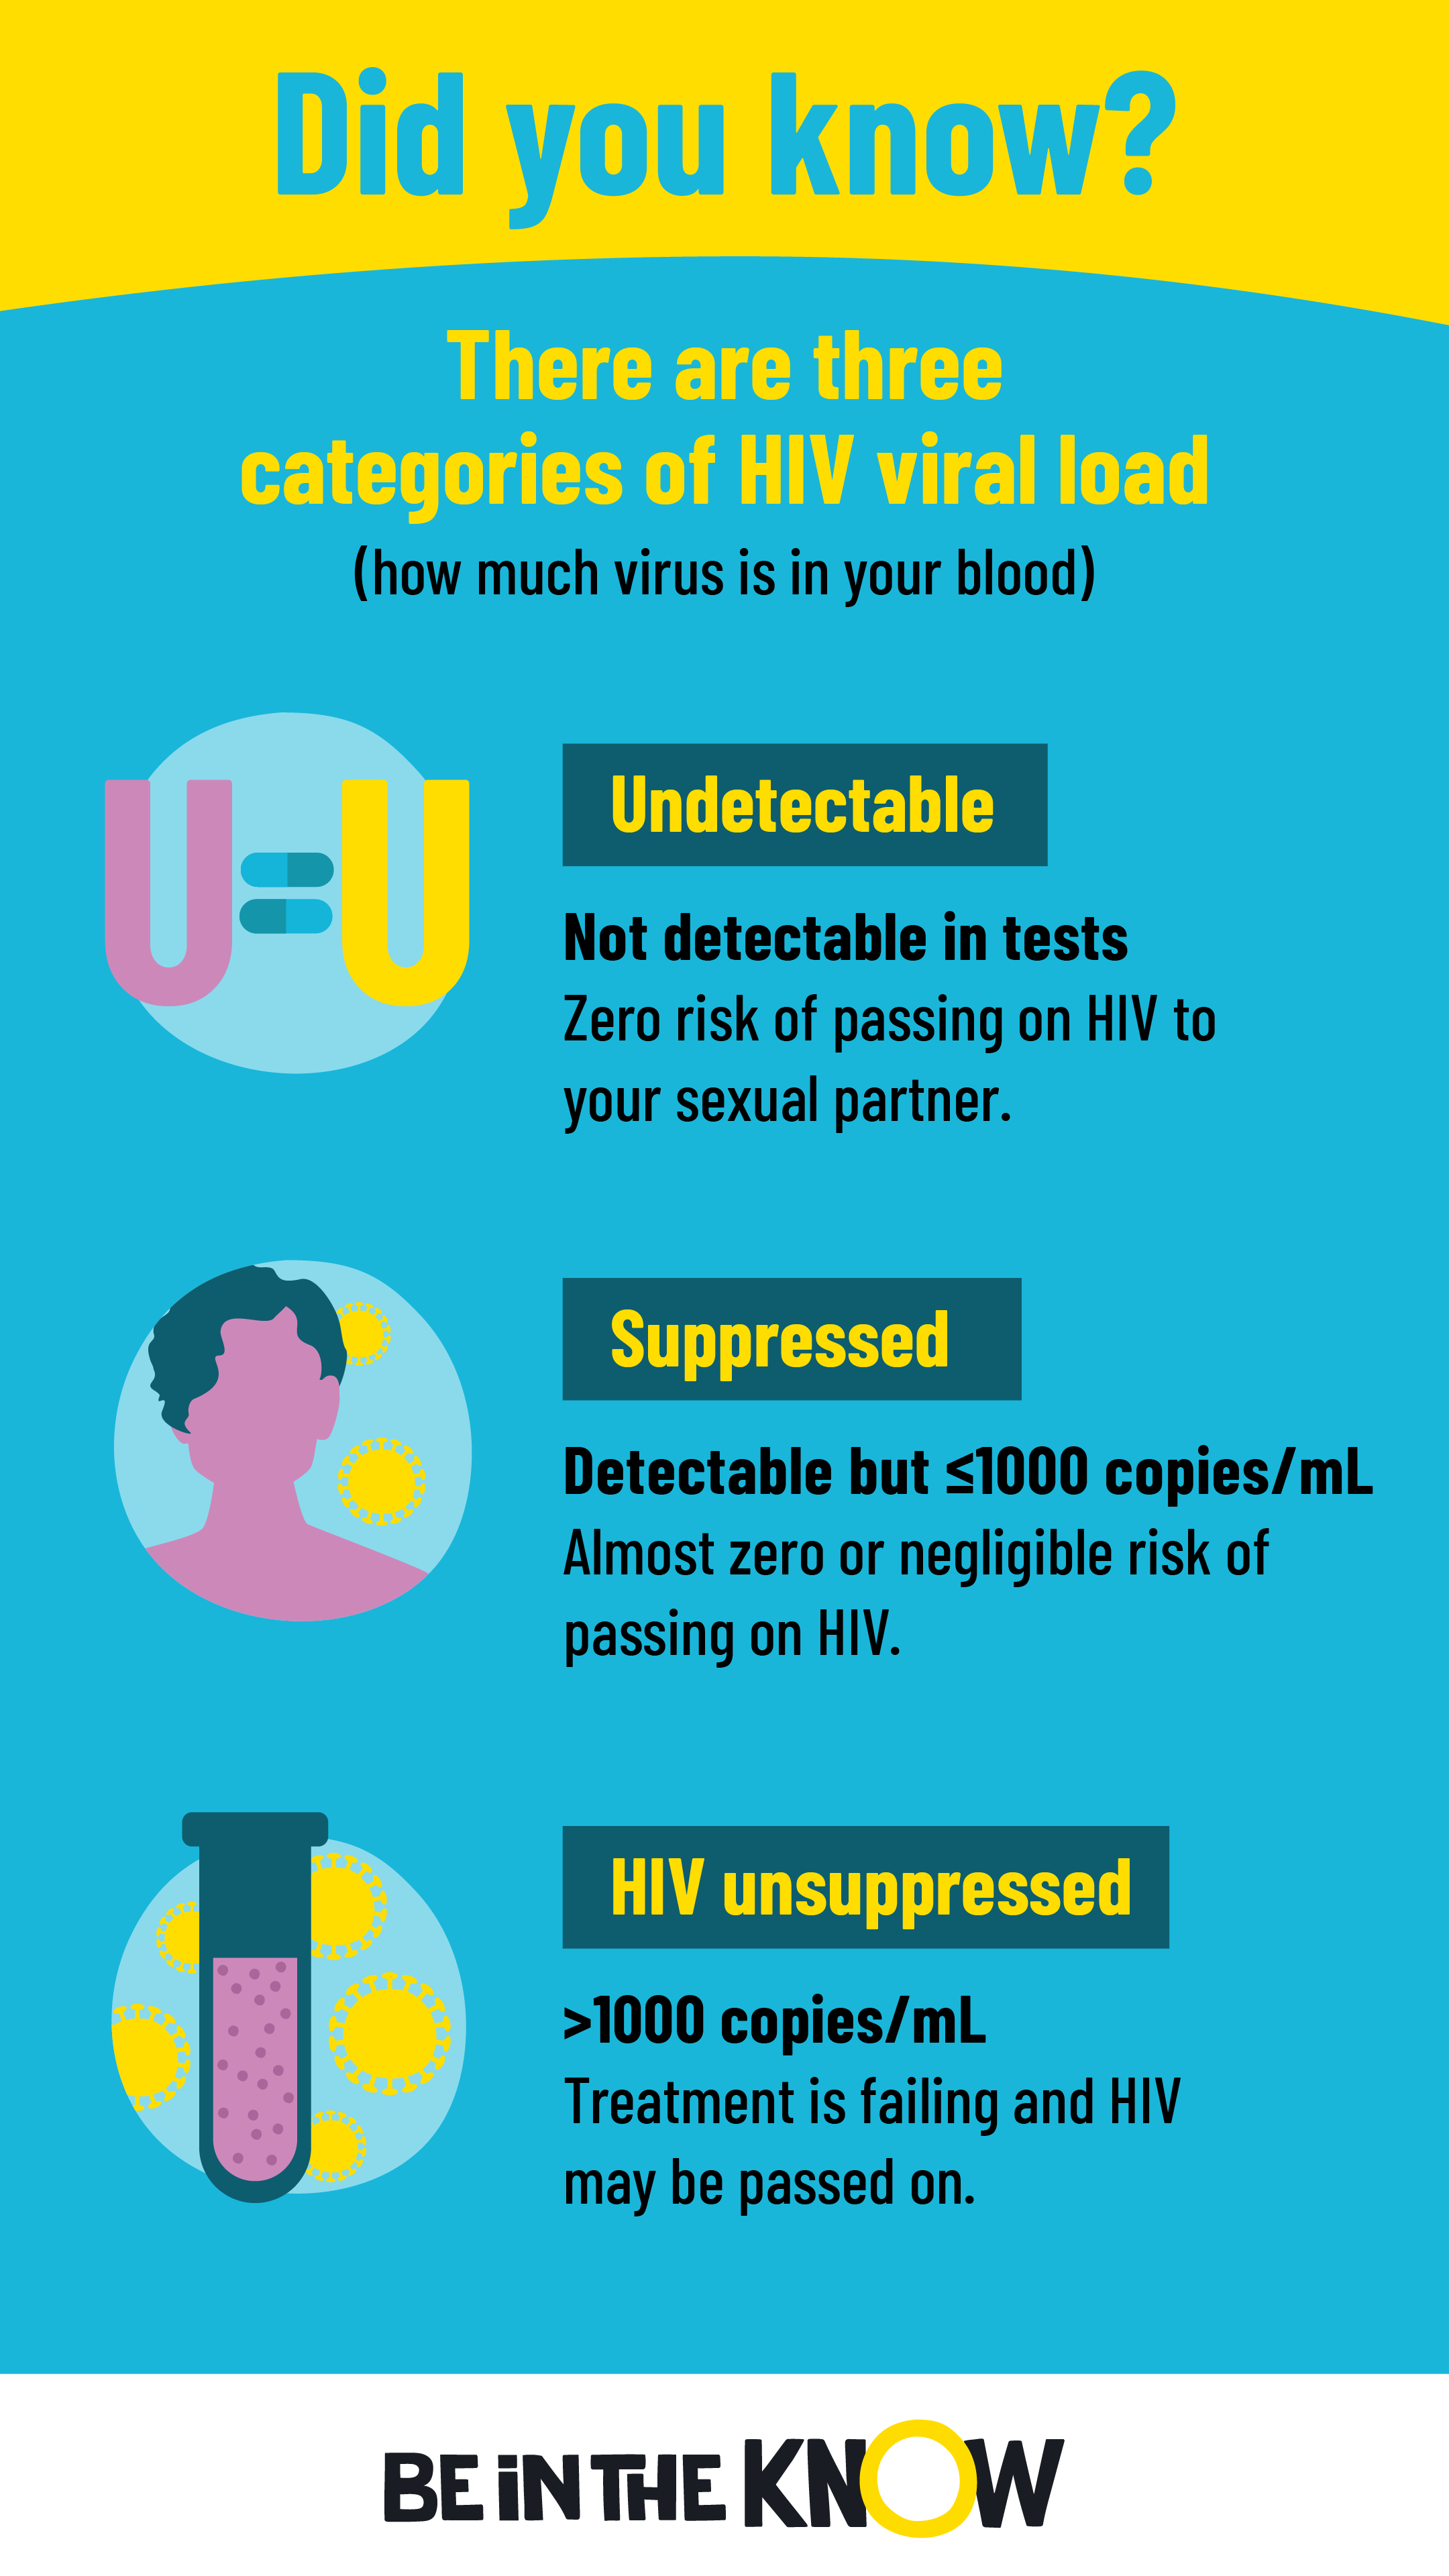 categories of HIV viral load